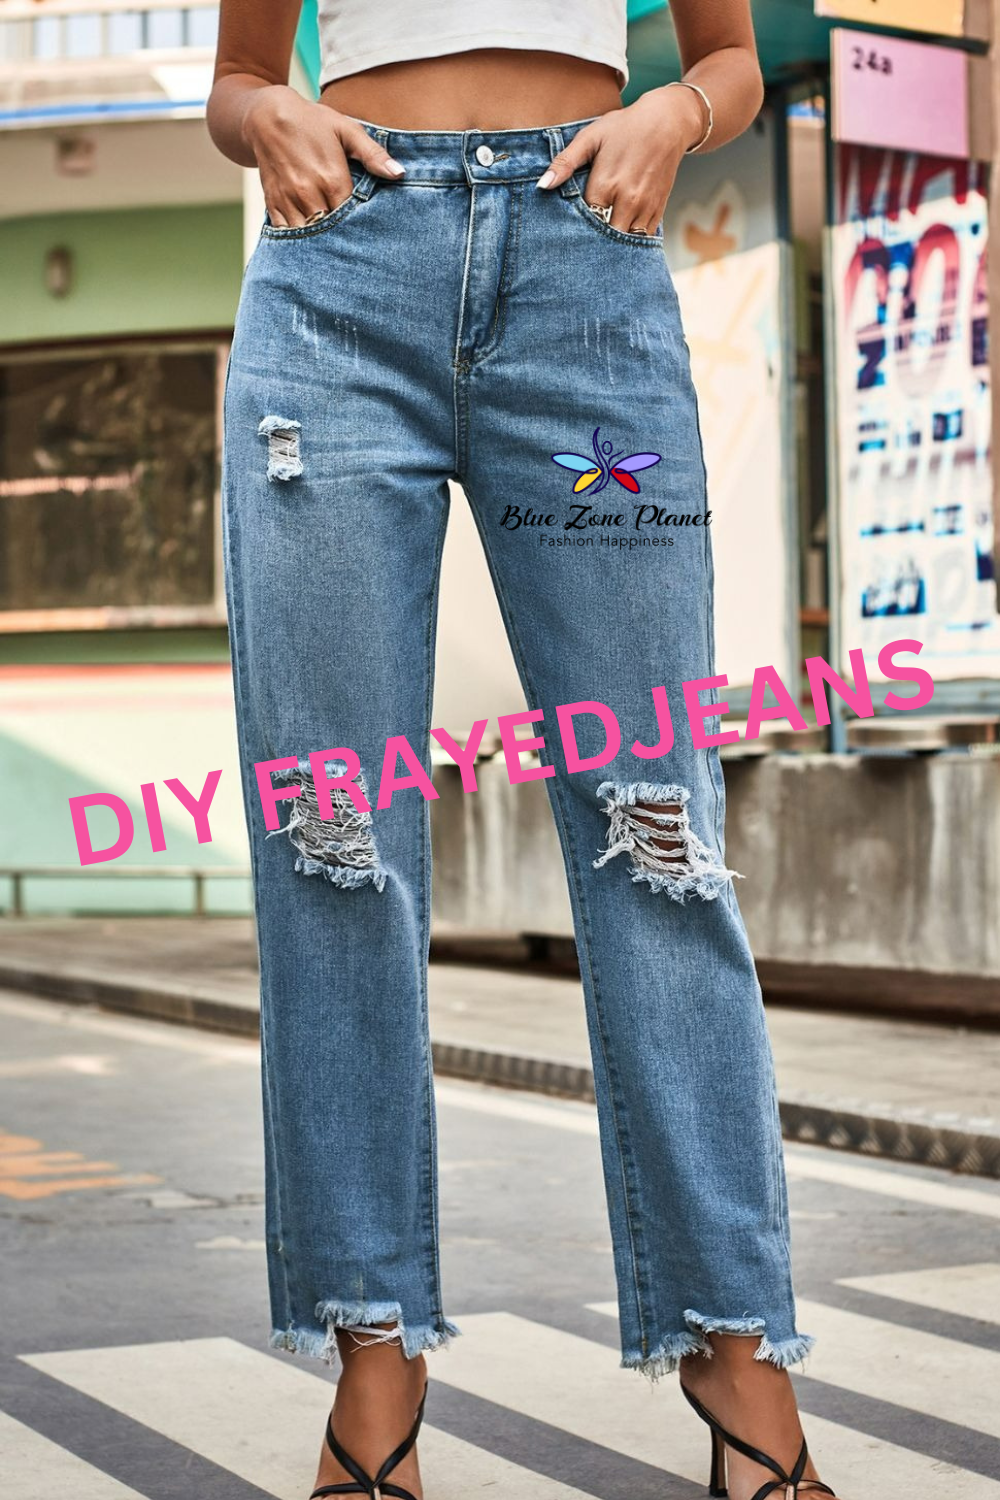 Example of Distressed Jeans you can purchase from Bluezoneplanet.com